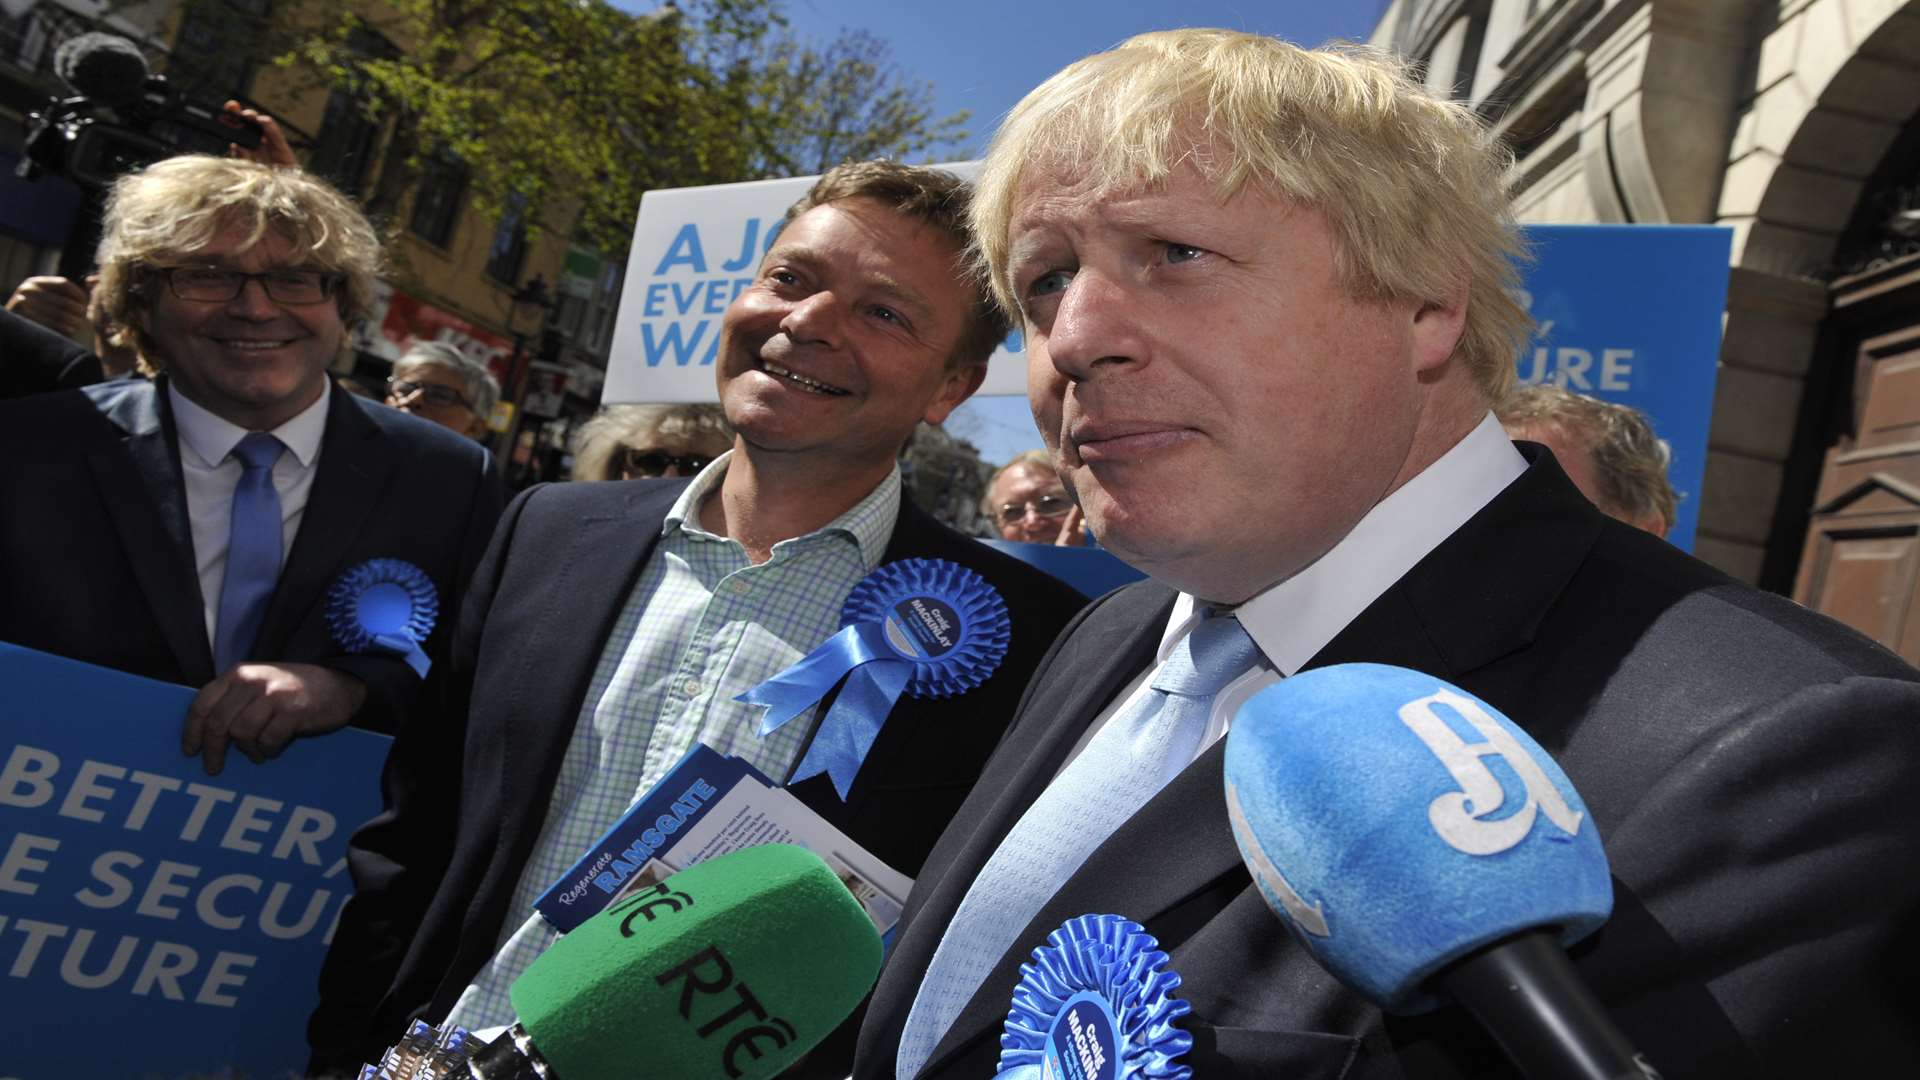 Boris Johnson was among many VIP visits to South Thanet during the election campaign